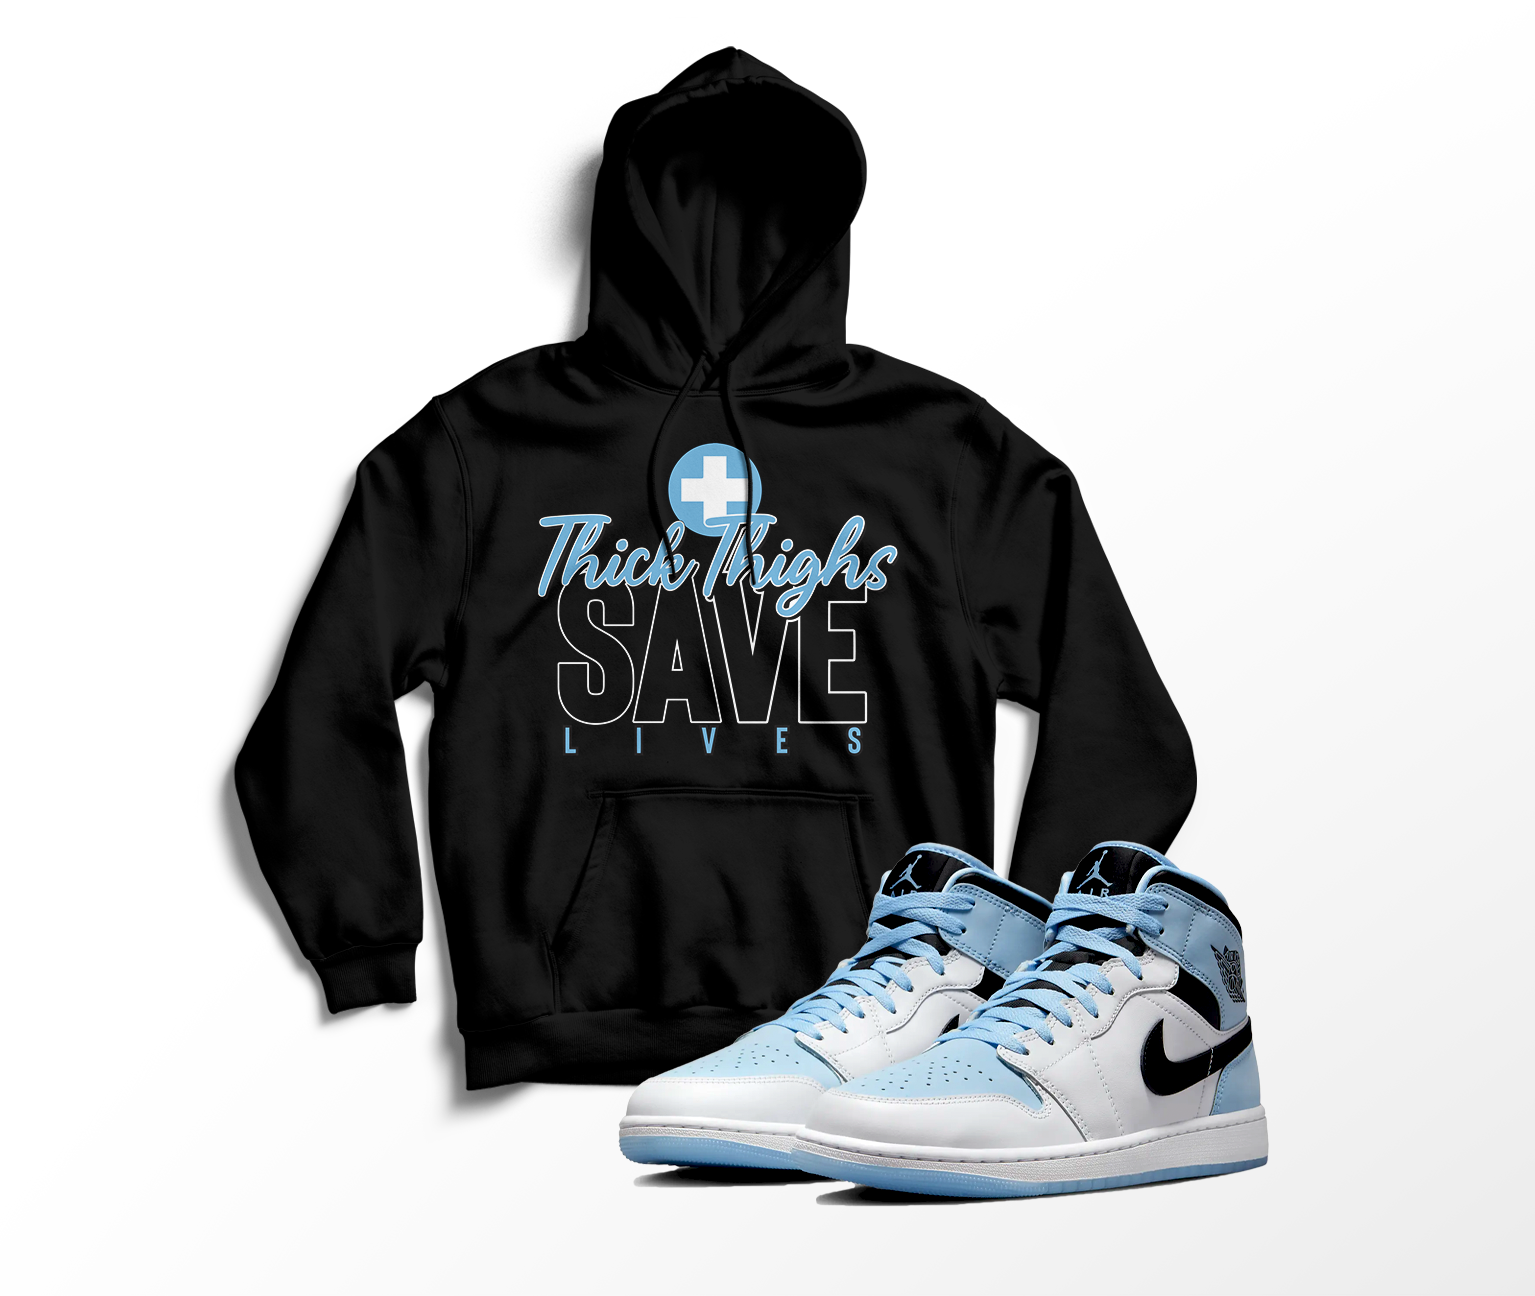 'Thick Thighs Save Lives' Custom Graphic Hoodie To Match Air Jordan 1 White Ice